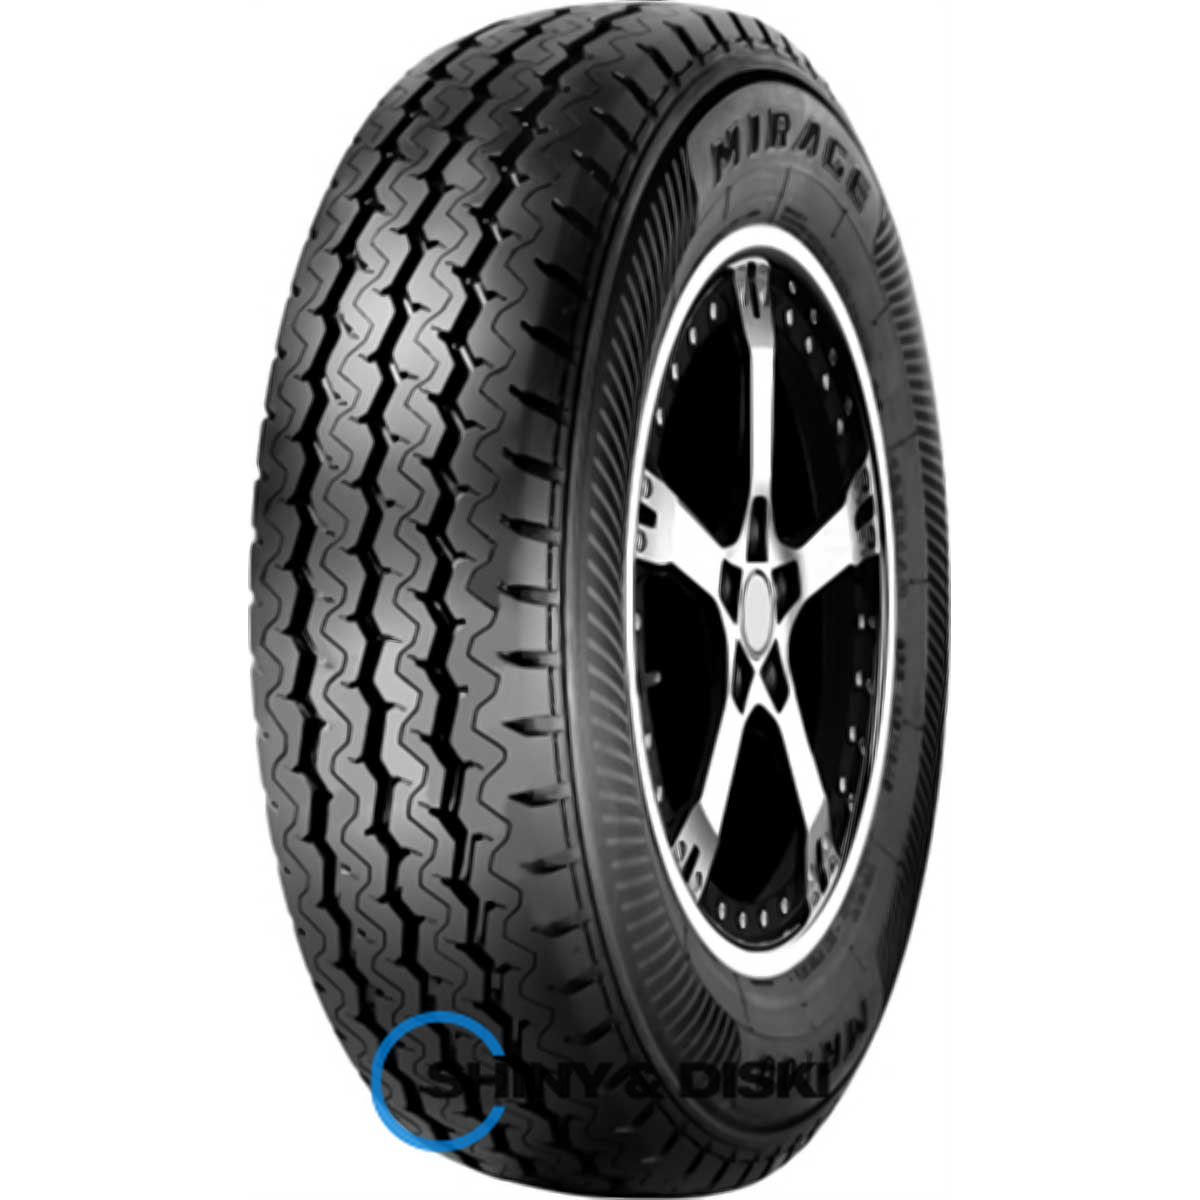 mirage mr-700 as 205/65 r16c 107/105t